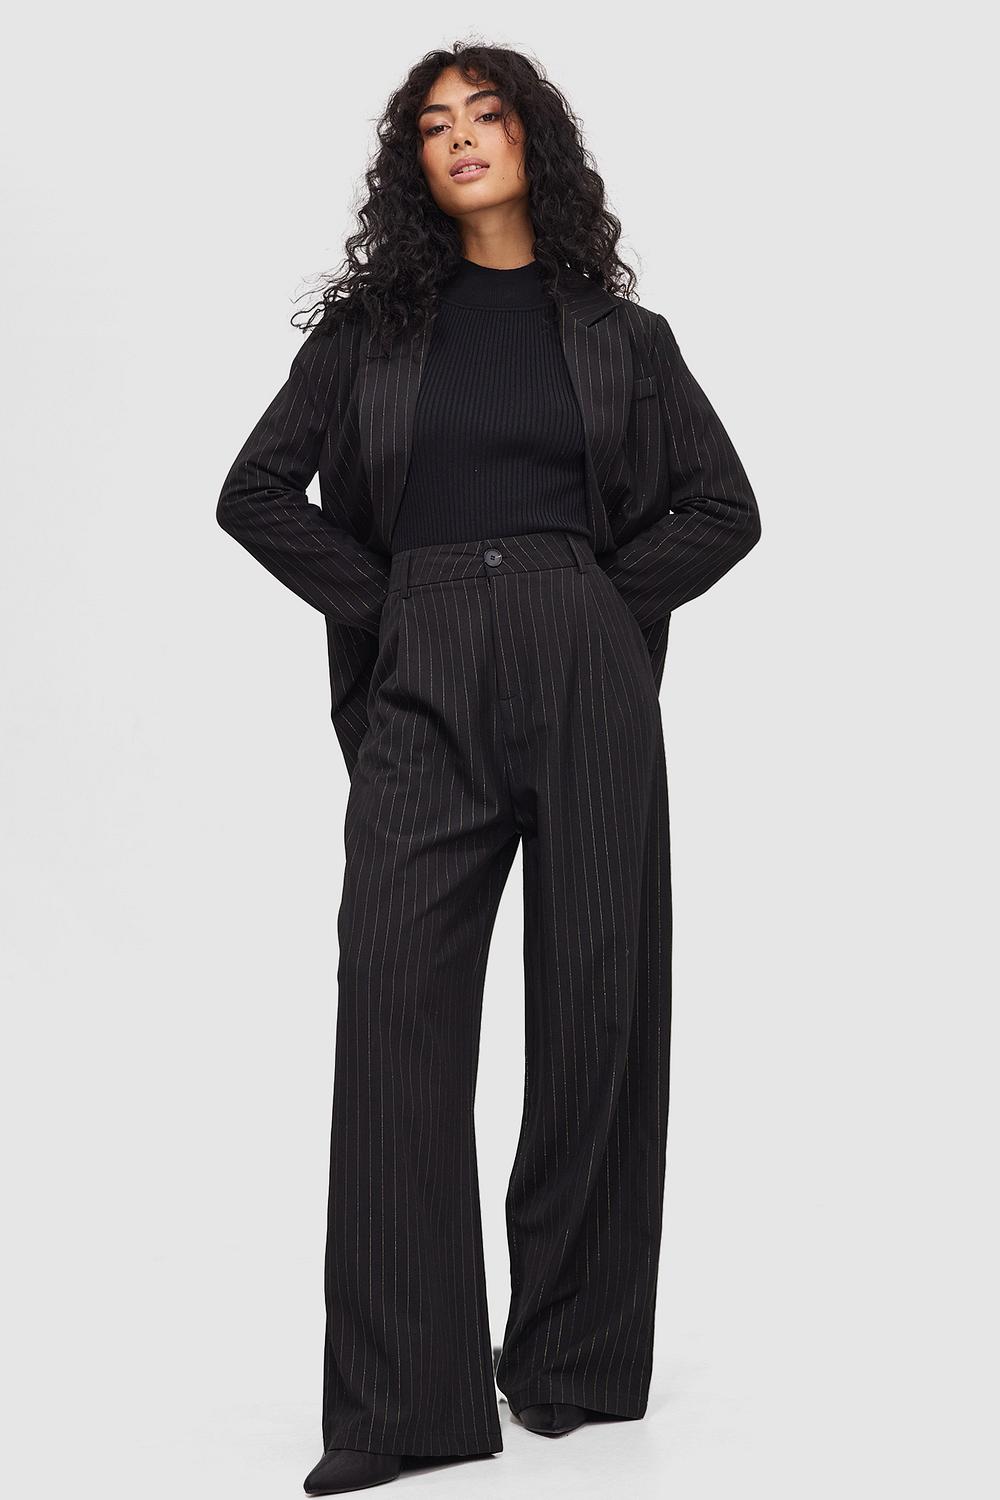 Black trousers with stripes